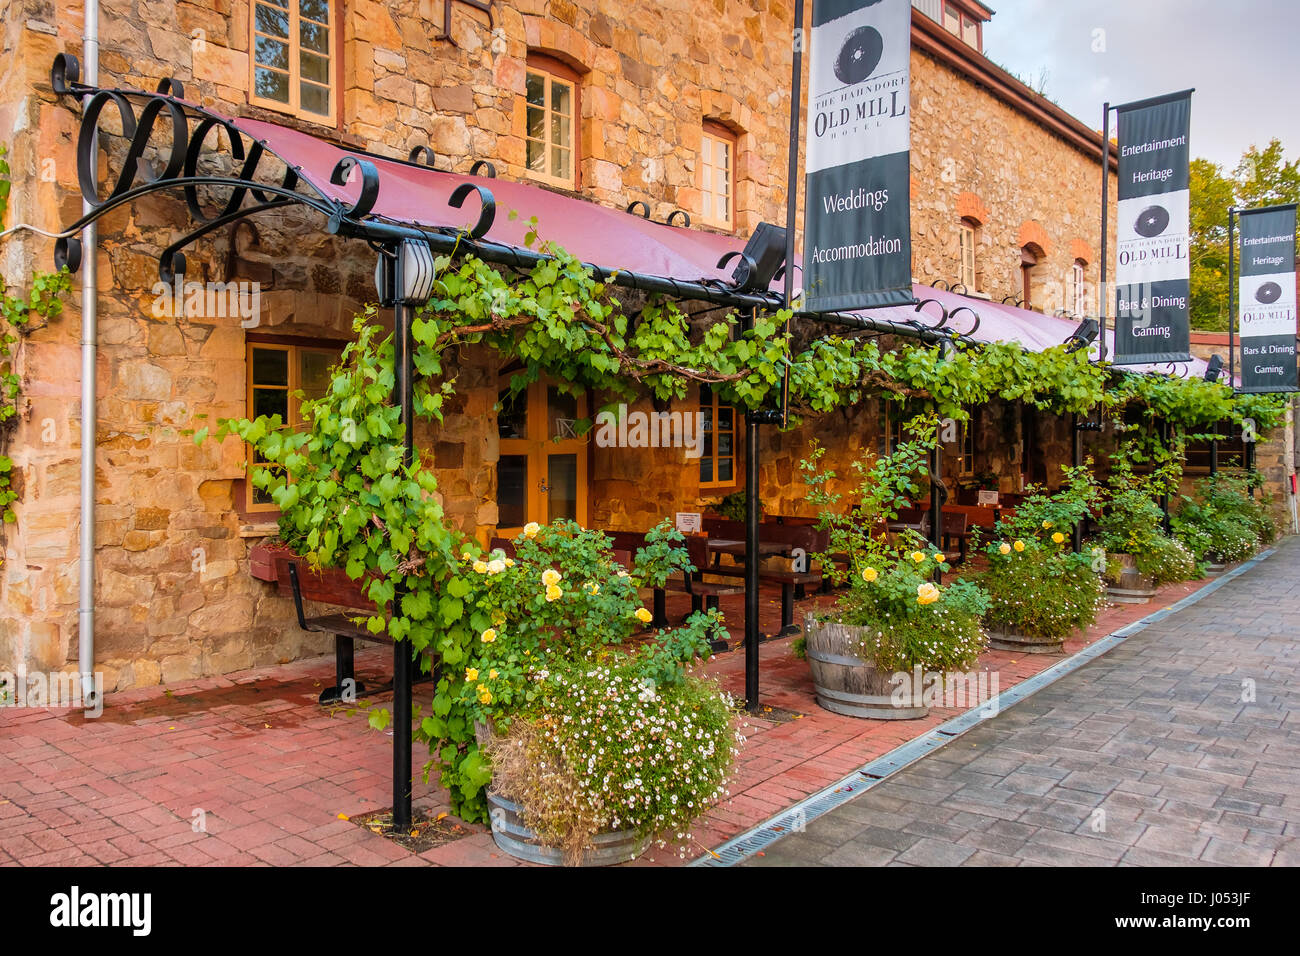 Hahndorf, South Australia - April 9, 2017: Old Mill Hotel of Hahndorf in Adelaide Hills area during autumn season Stock Photo